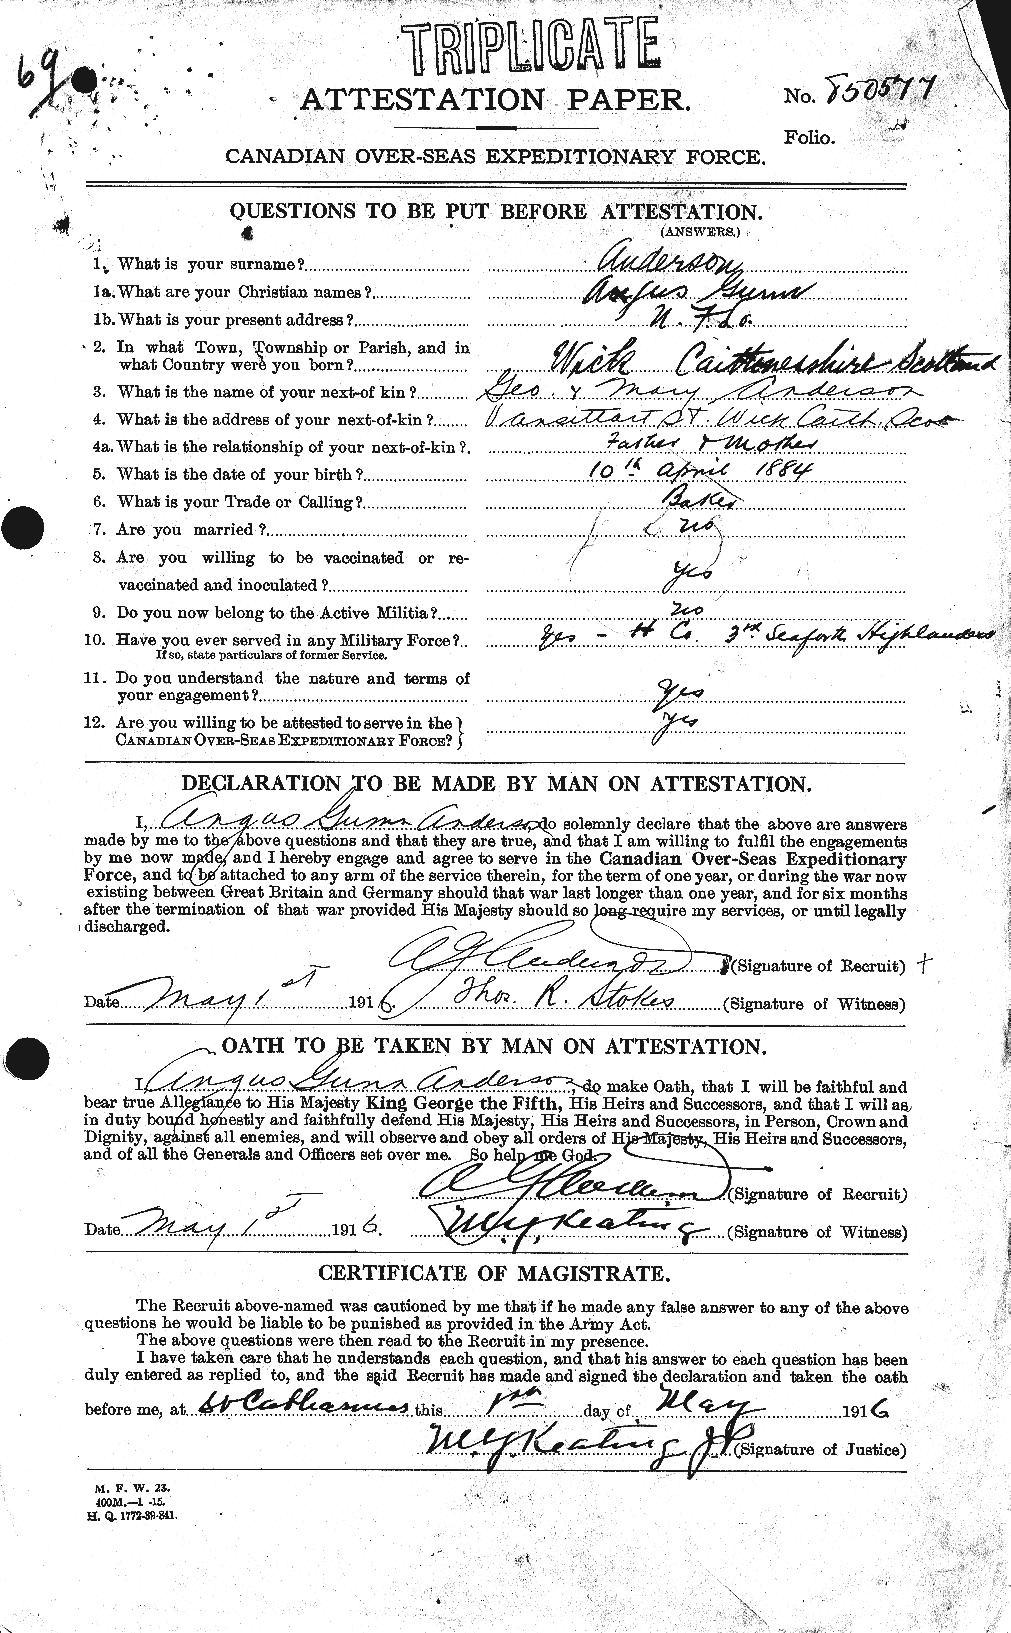 Personnel Records of the First World War - CEF 209390a